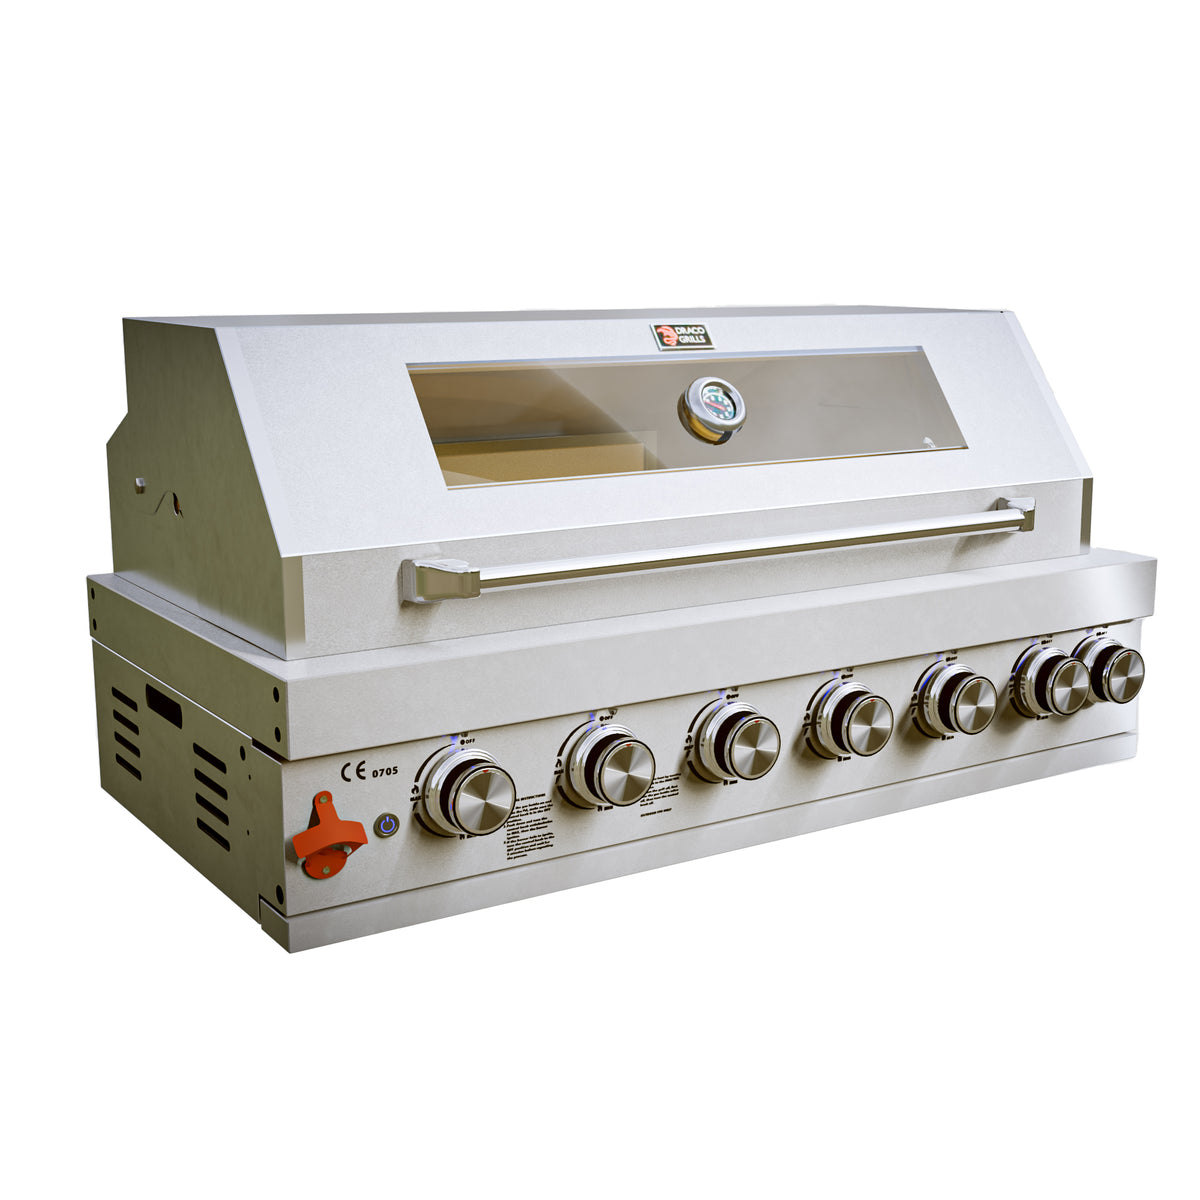 Draco Grills Z640B Deluxe 6 Burner Stainless Steel Build in Gas Barbecue